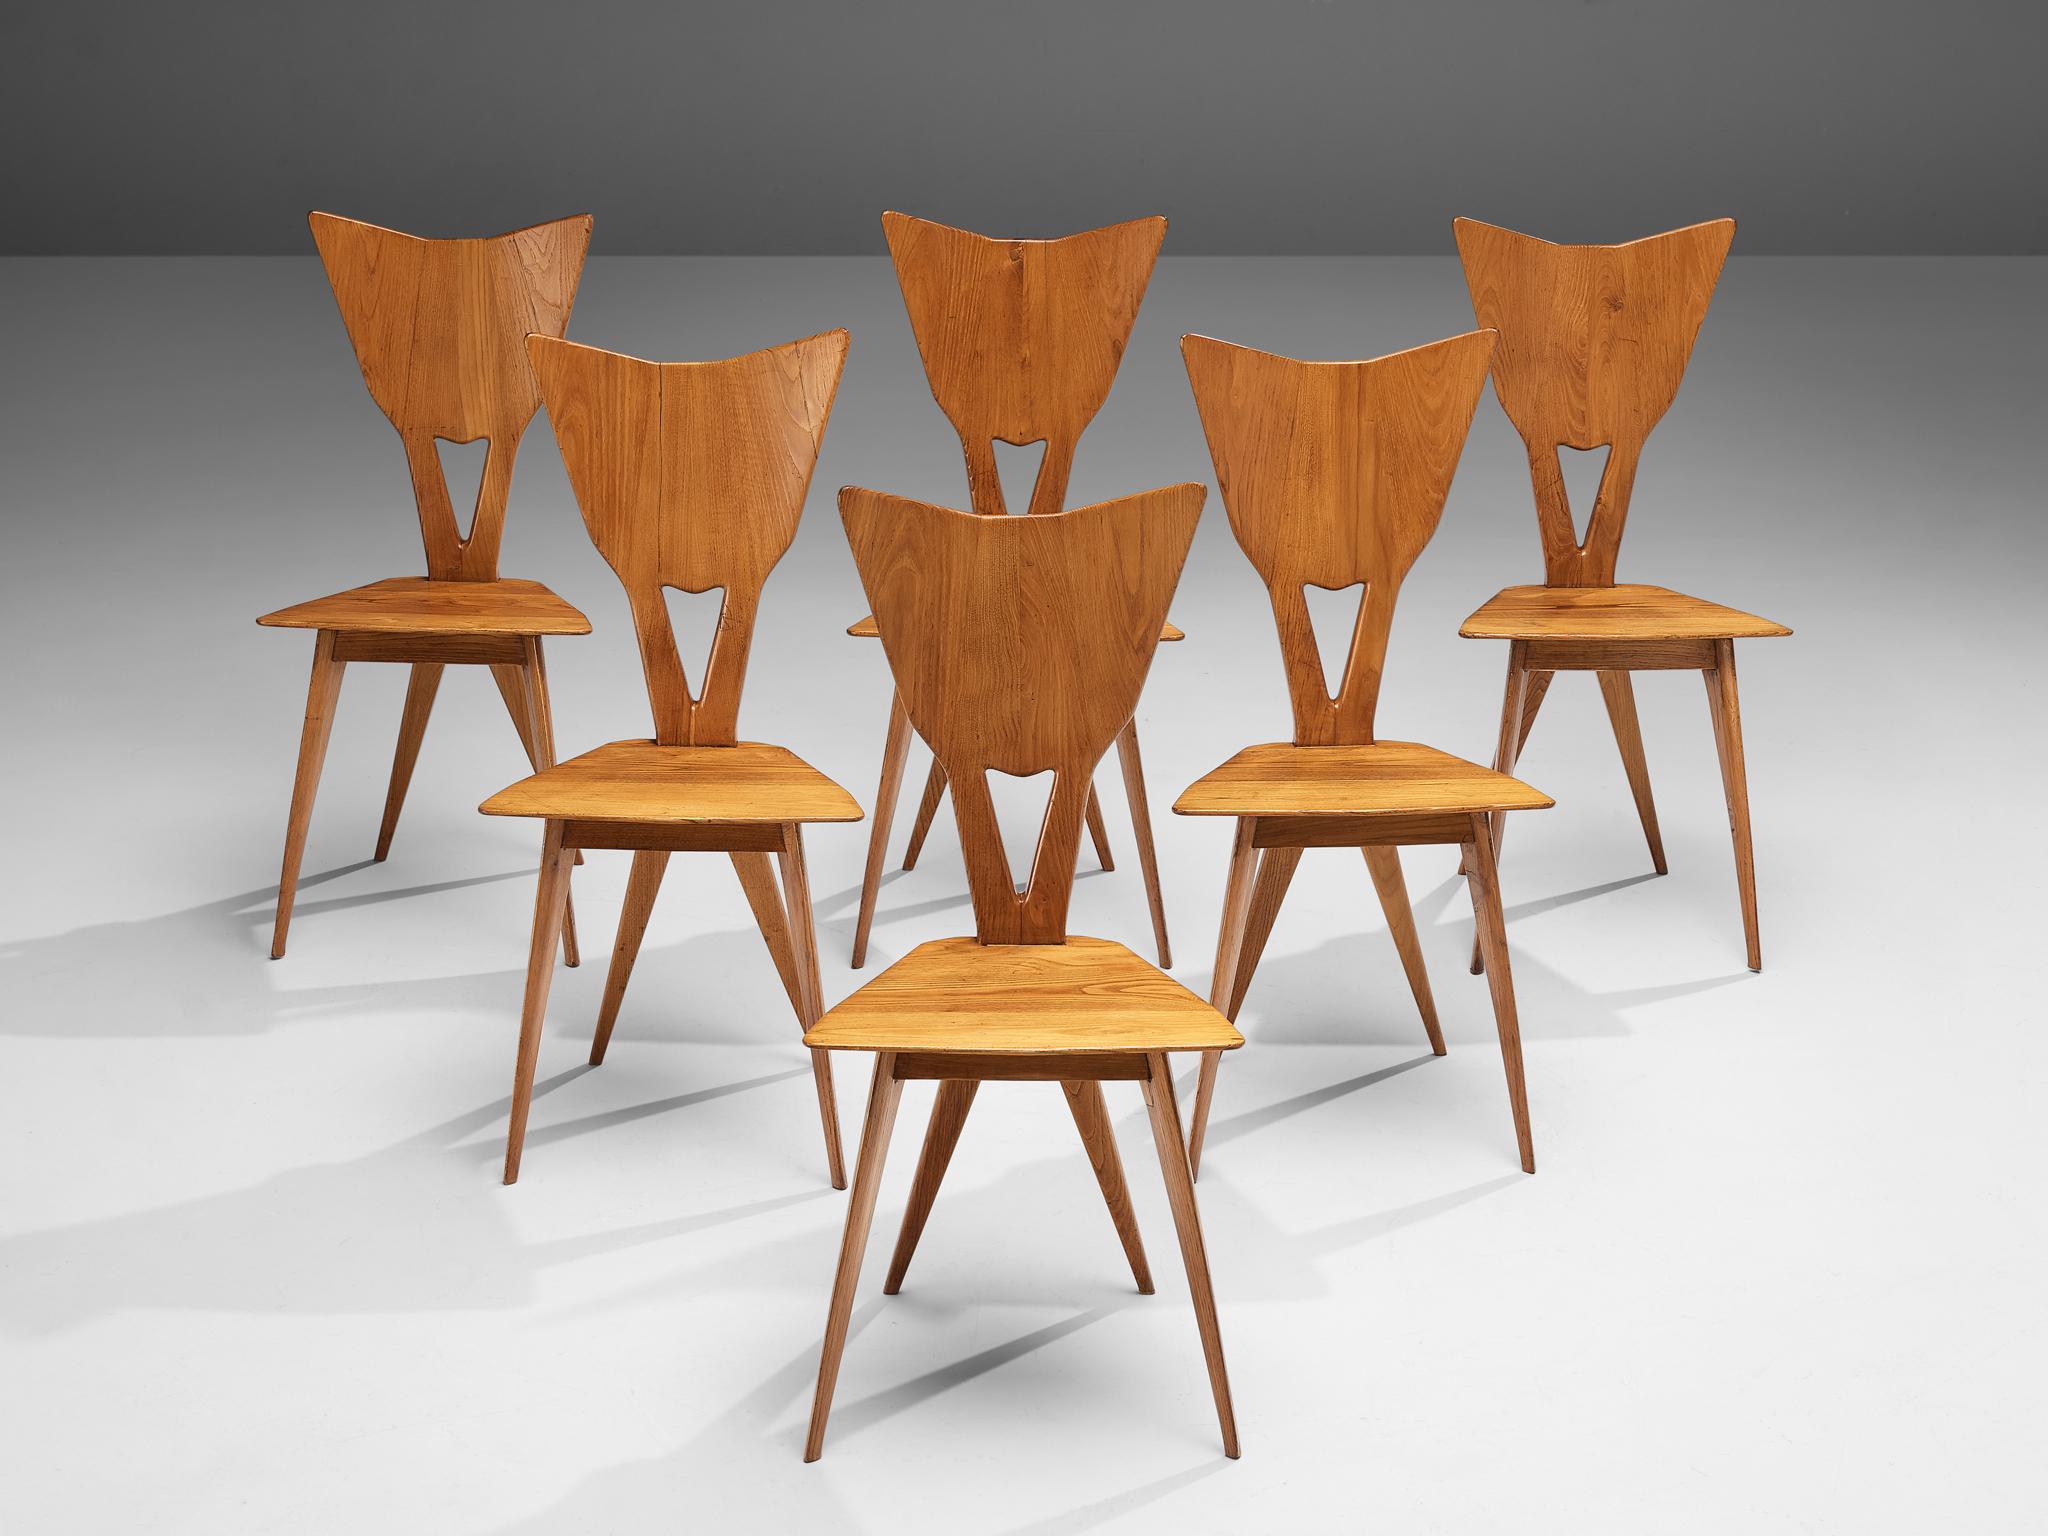 Set of 6 Italian chairs, stained ash, Italy, 1950s

Delicate set of 6 Italian chairs in stained ash. The beautiful natural grain of the ash wood contributes to the organic design. Based on the shape of a triangle, both the seat and the backrest